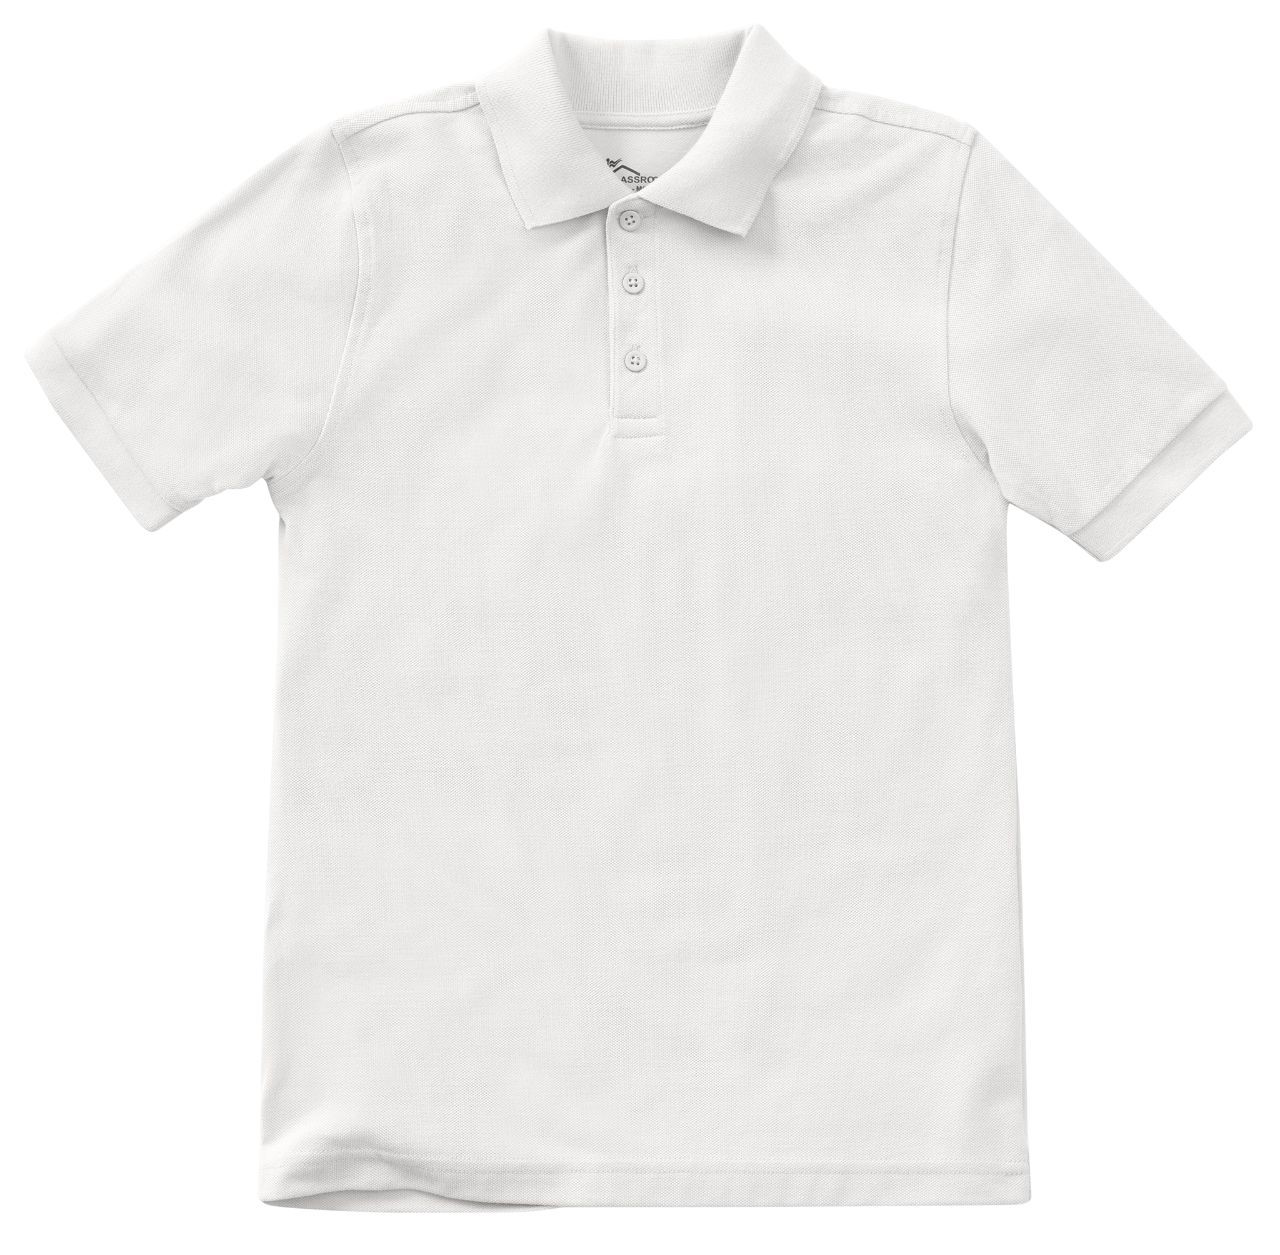 RG-Youth short sleeve Polo shirt with logo